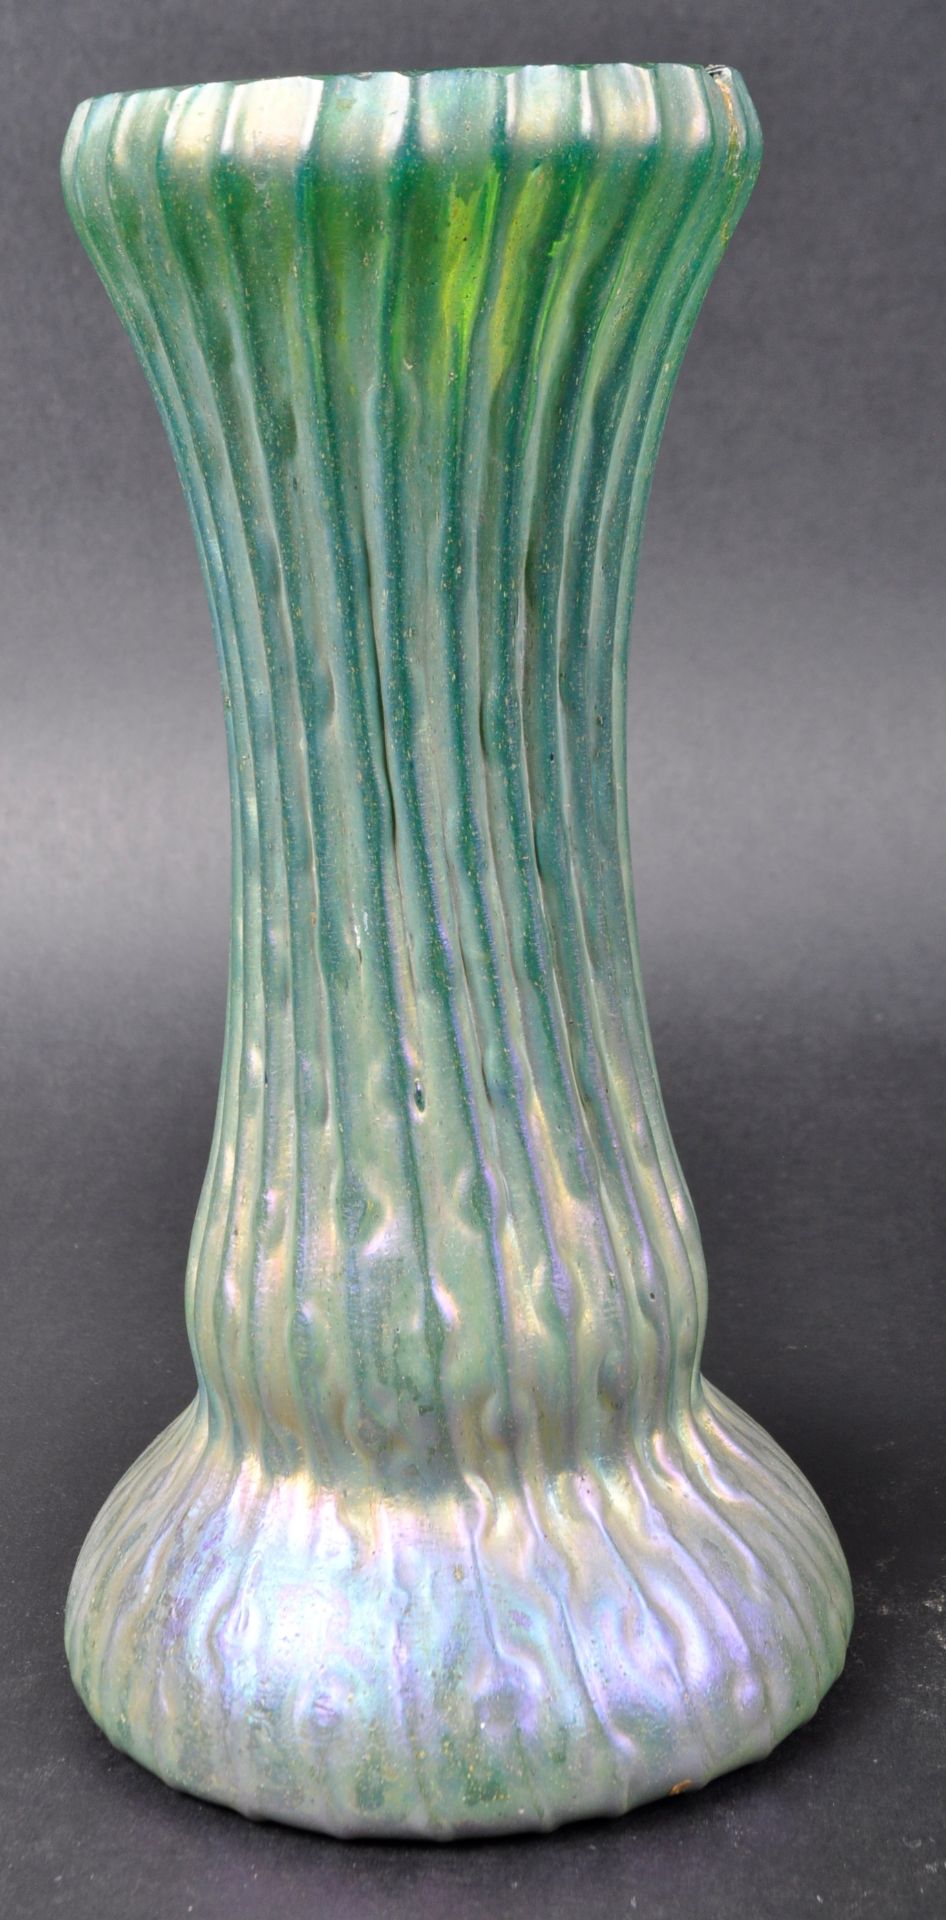 SELECTION OF ART NOUVEAU PEARLESCENT GLASS VASES - Image 9 of 13